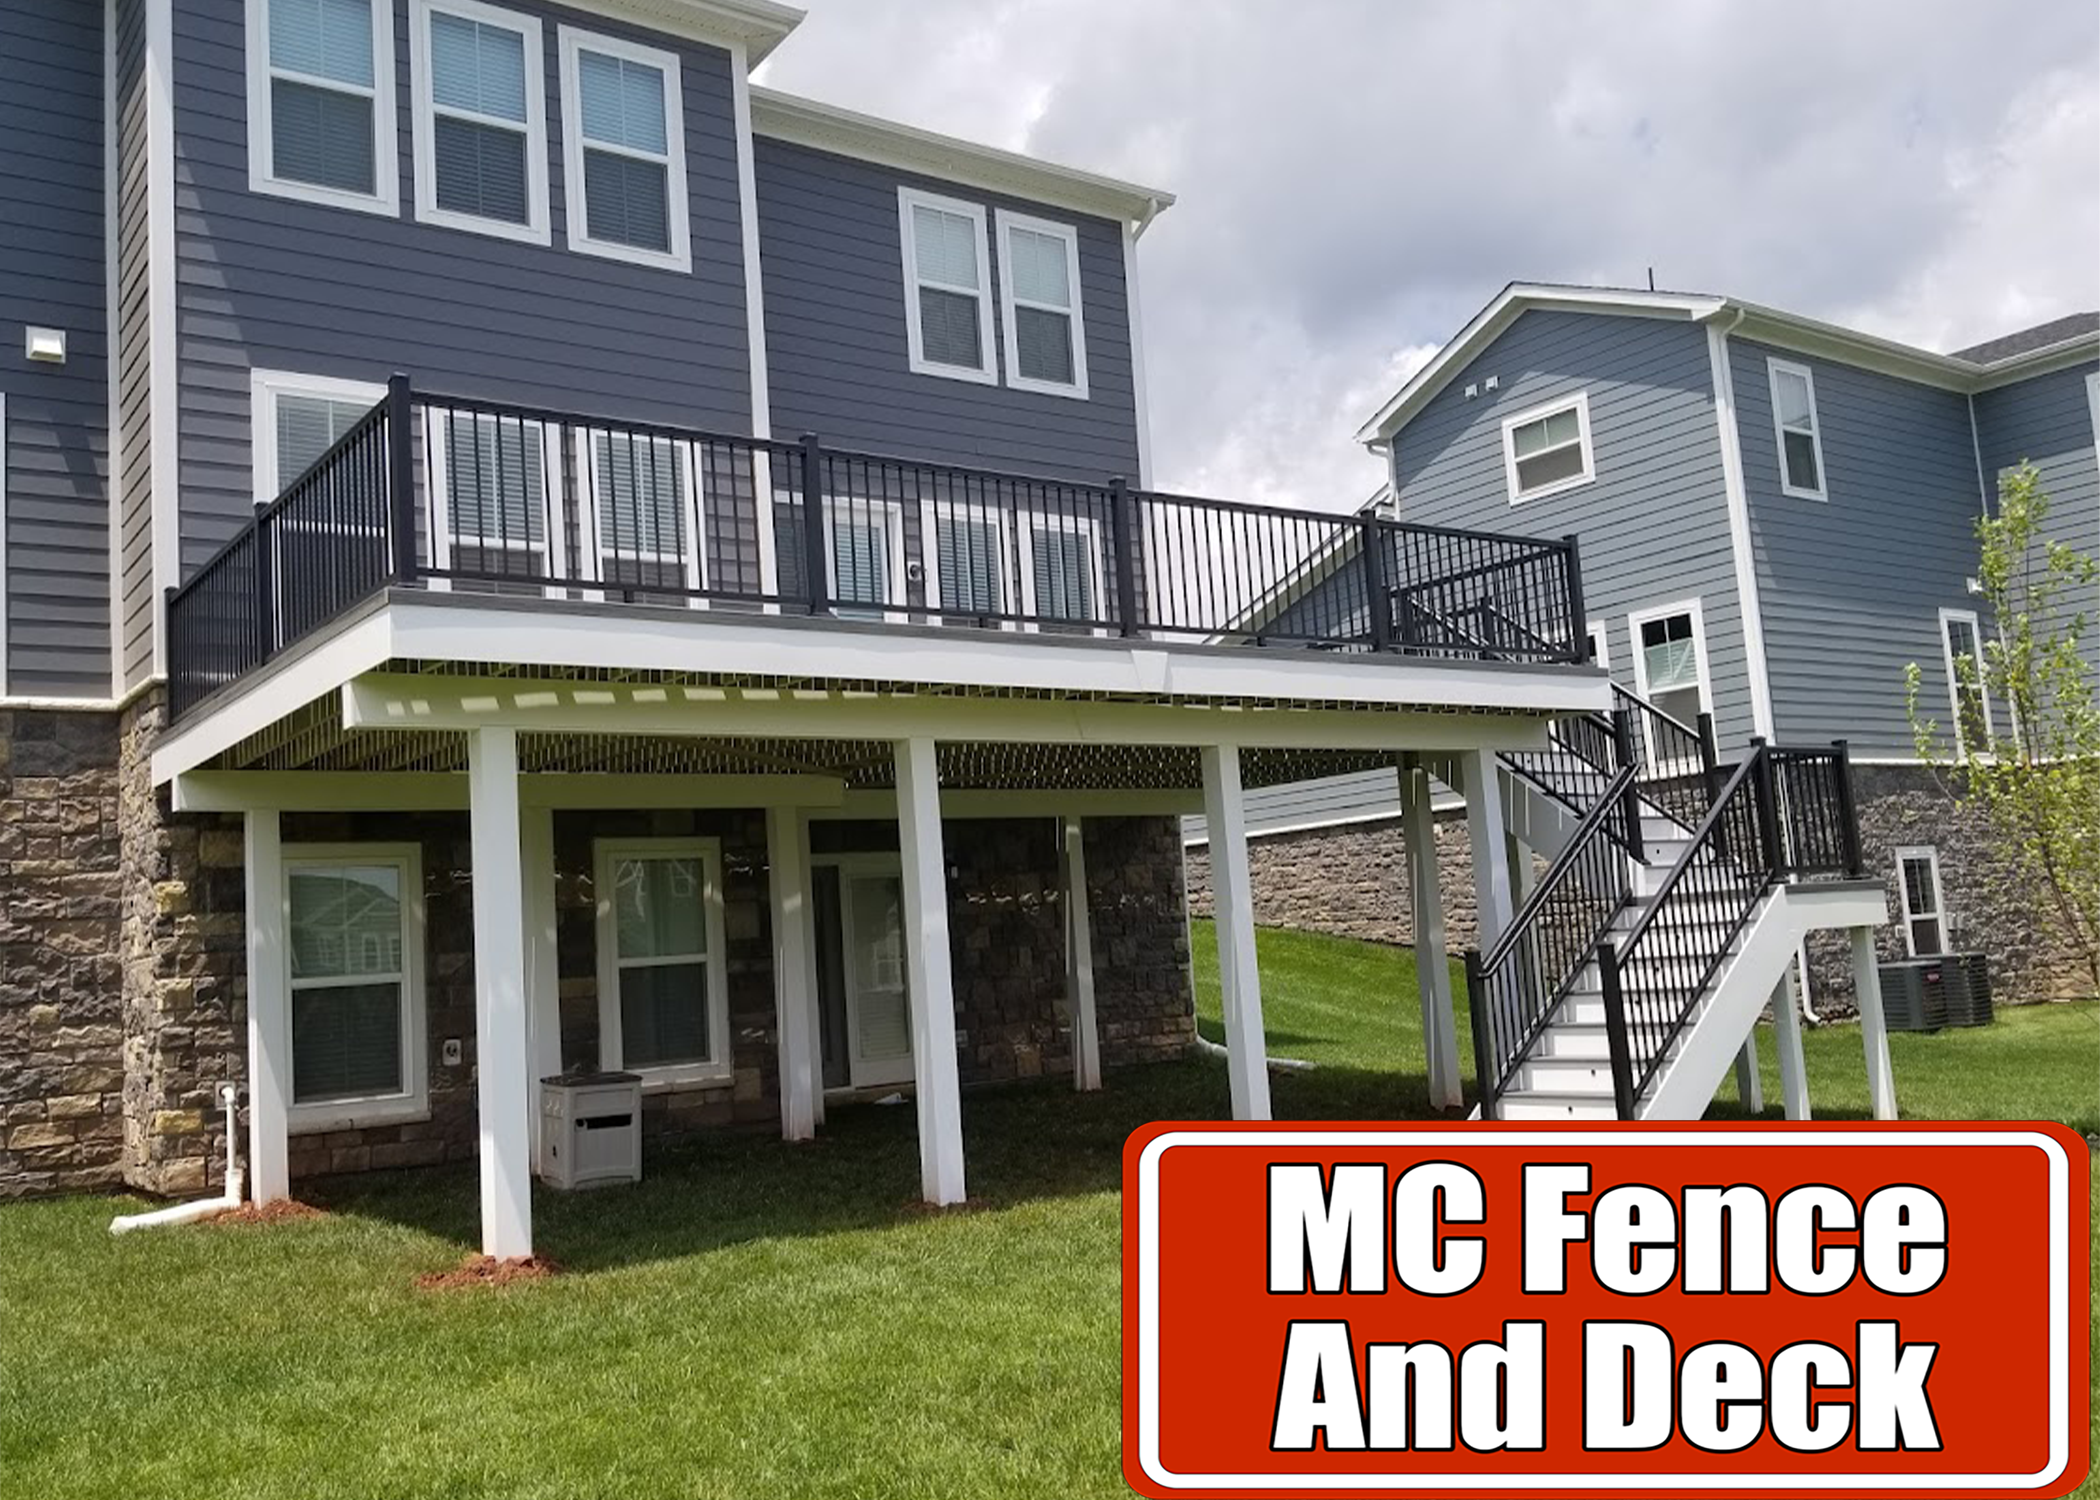 MC Fence And Deck Frederick reviews | 28 South Wisner St - Frederick MD